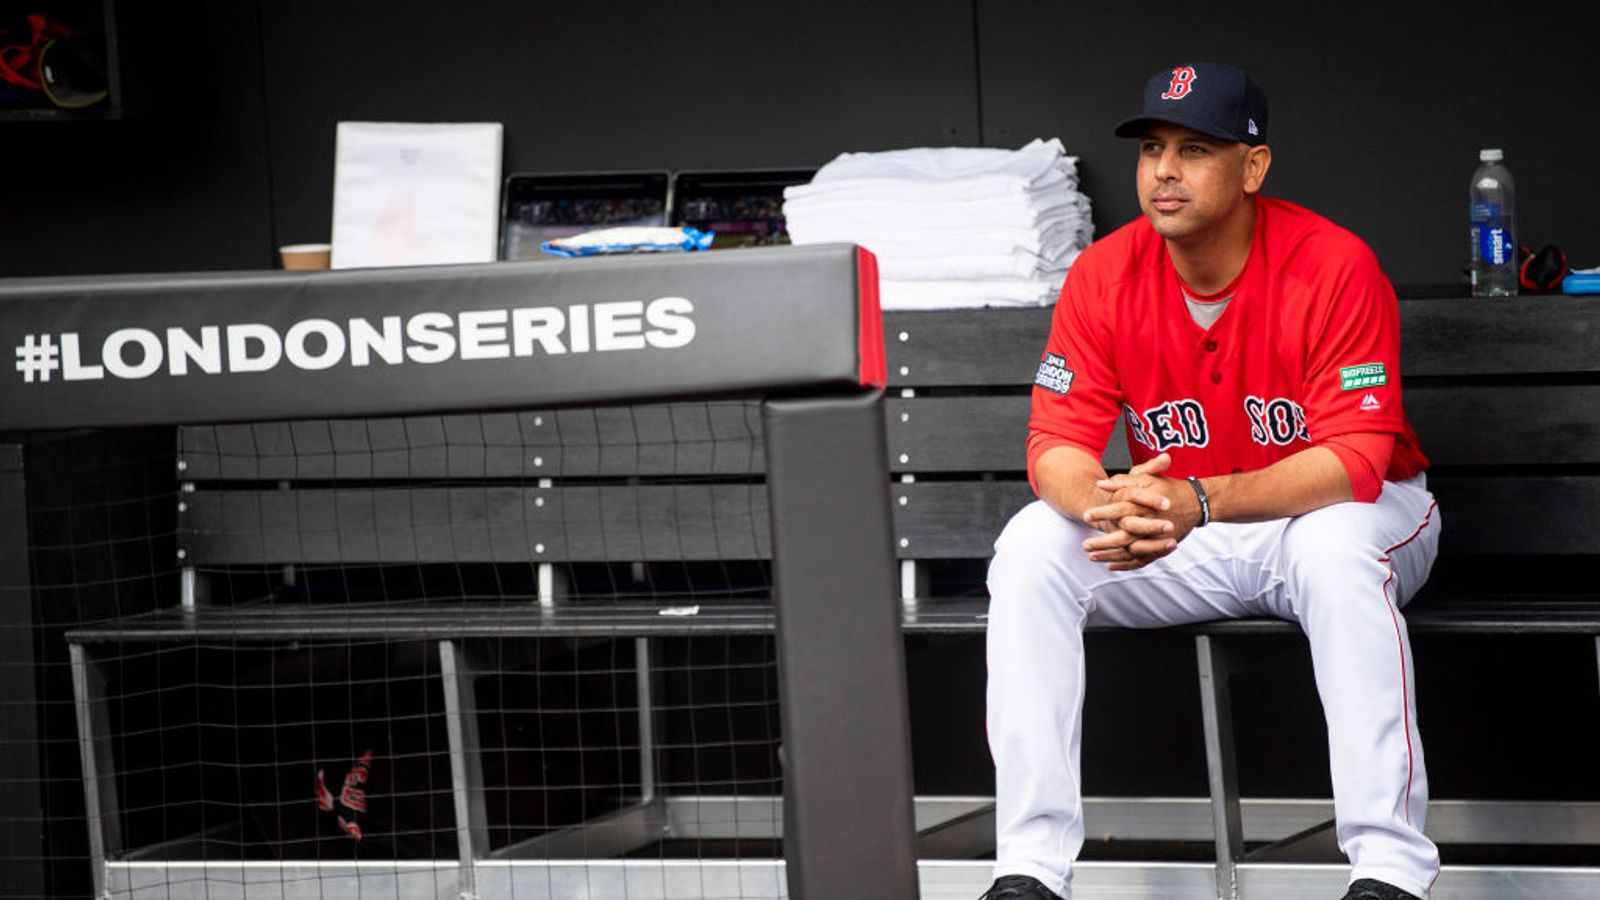 It's been a challenge': Red Sox season has been a grind for Alex Cora